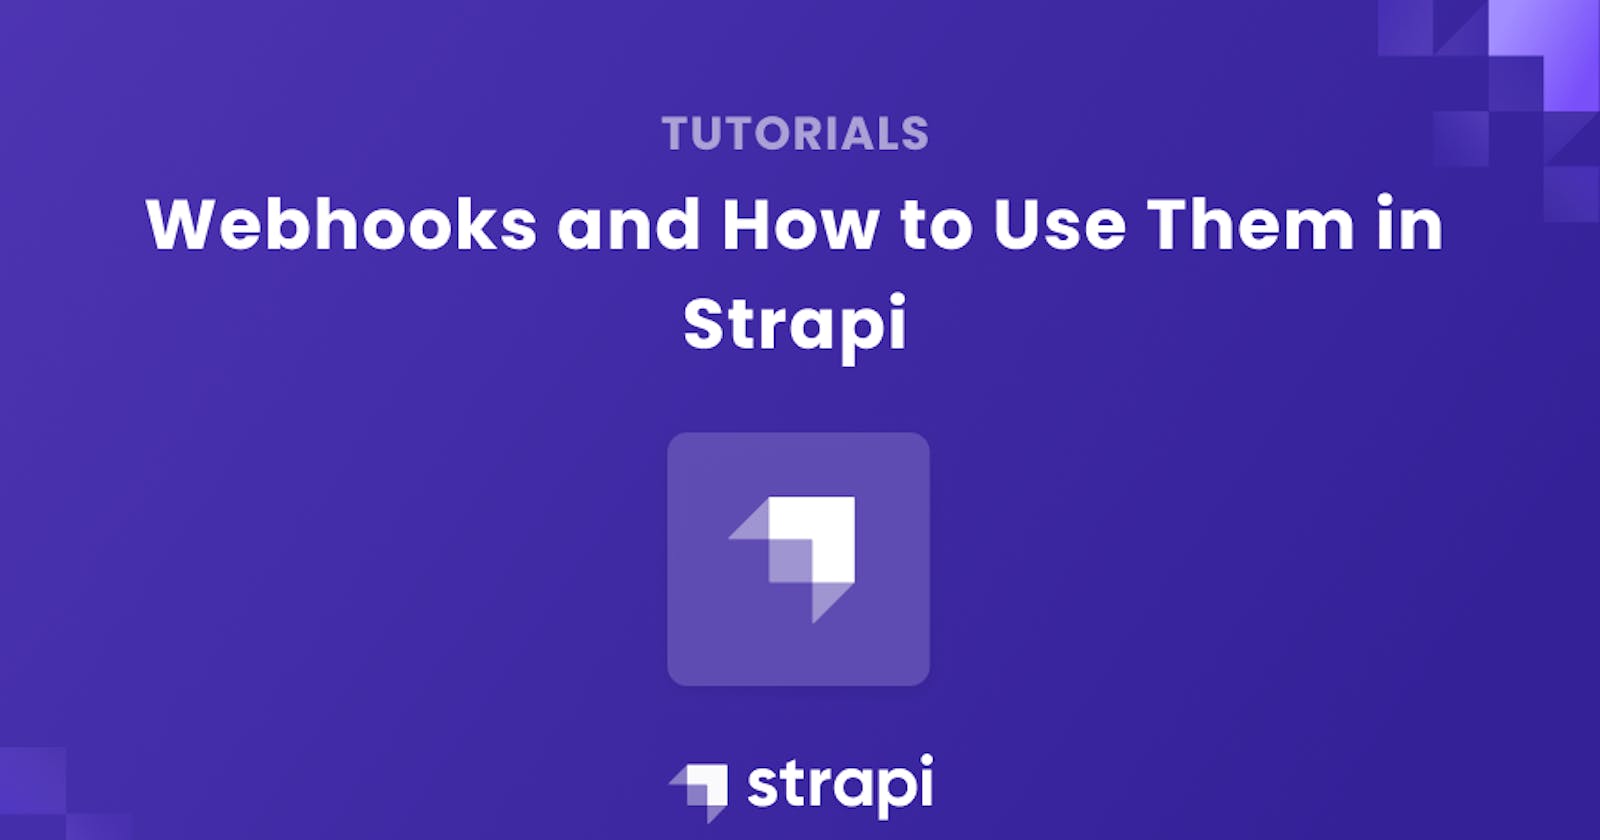 Webhooks and How to Use Them in Strapi